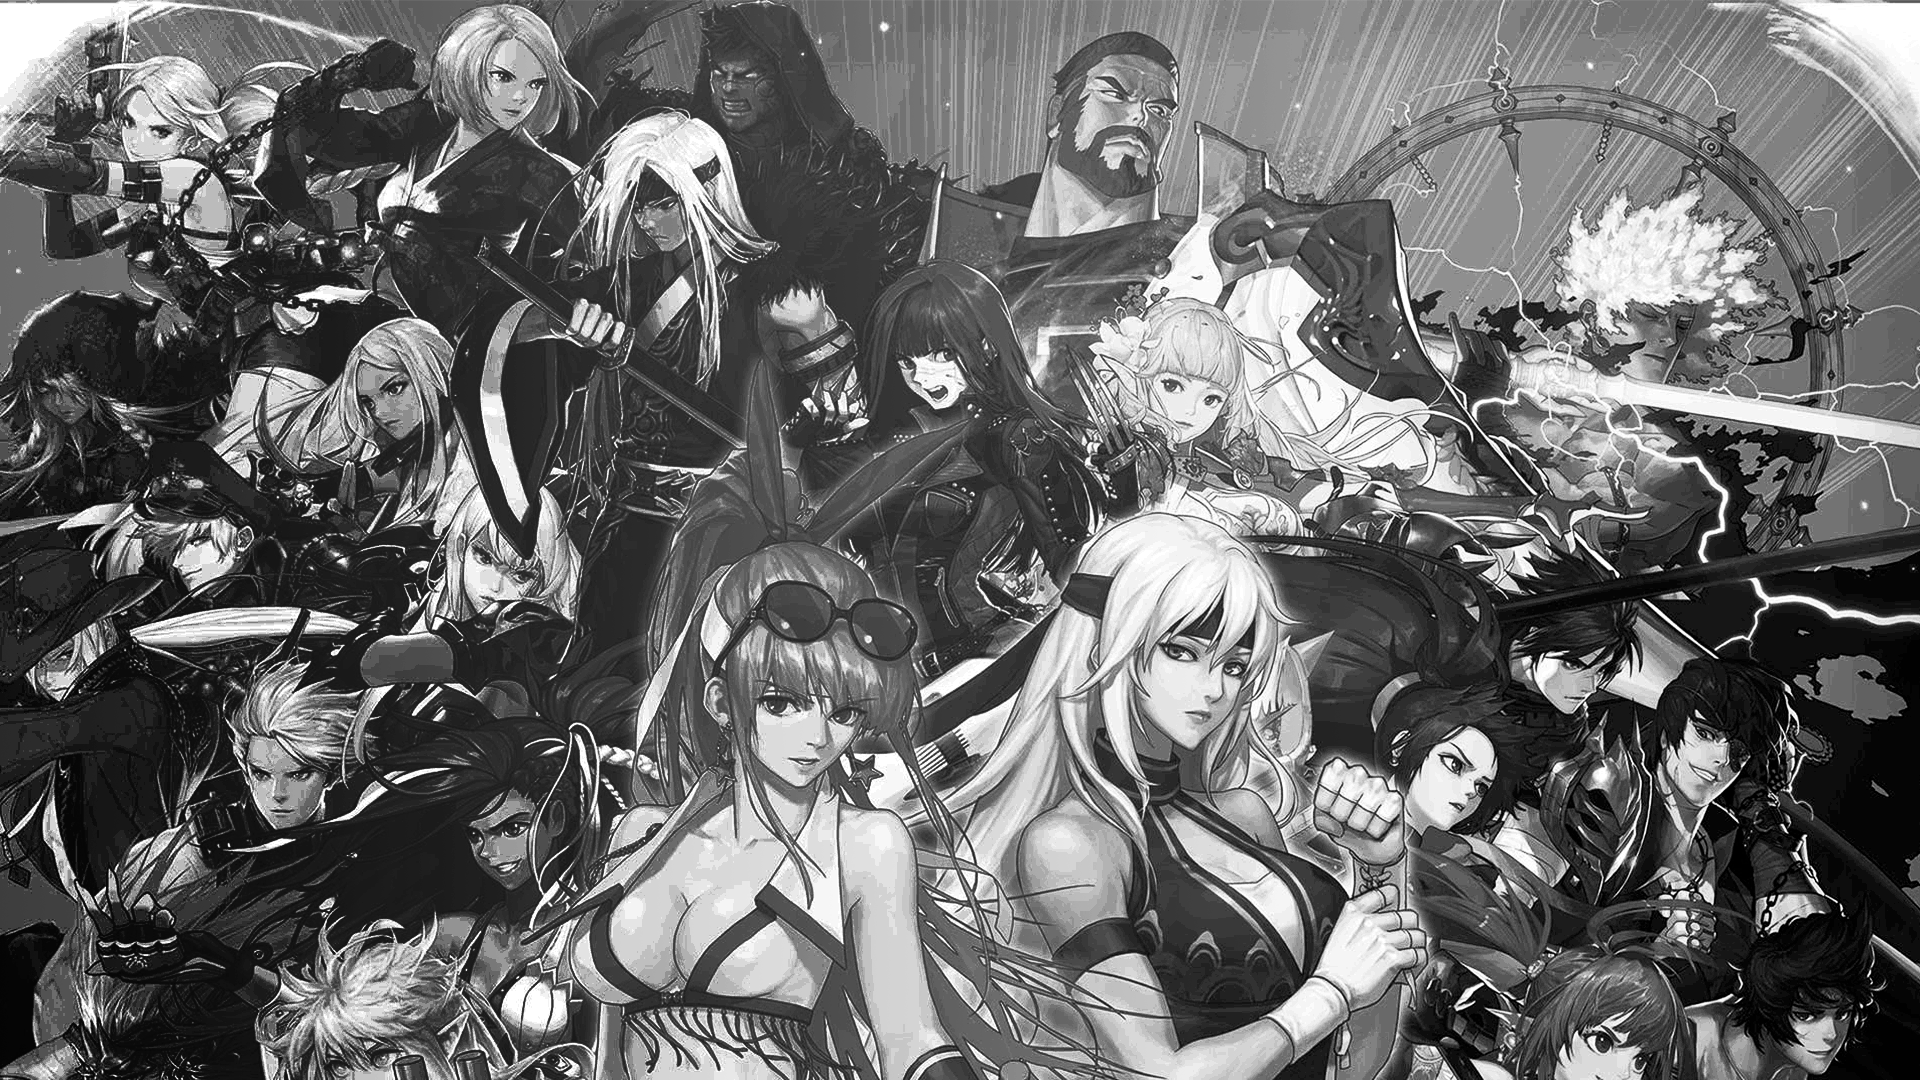 Dungeon Fighter Online Picture